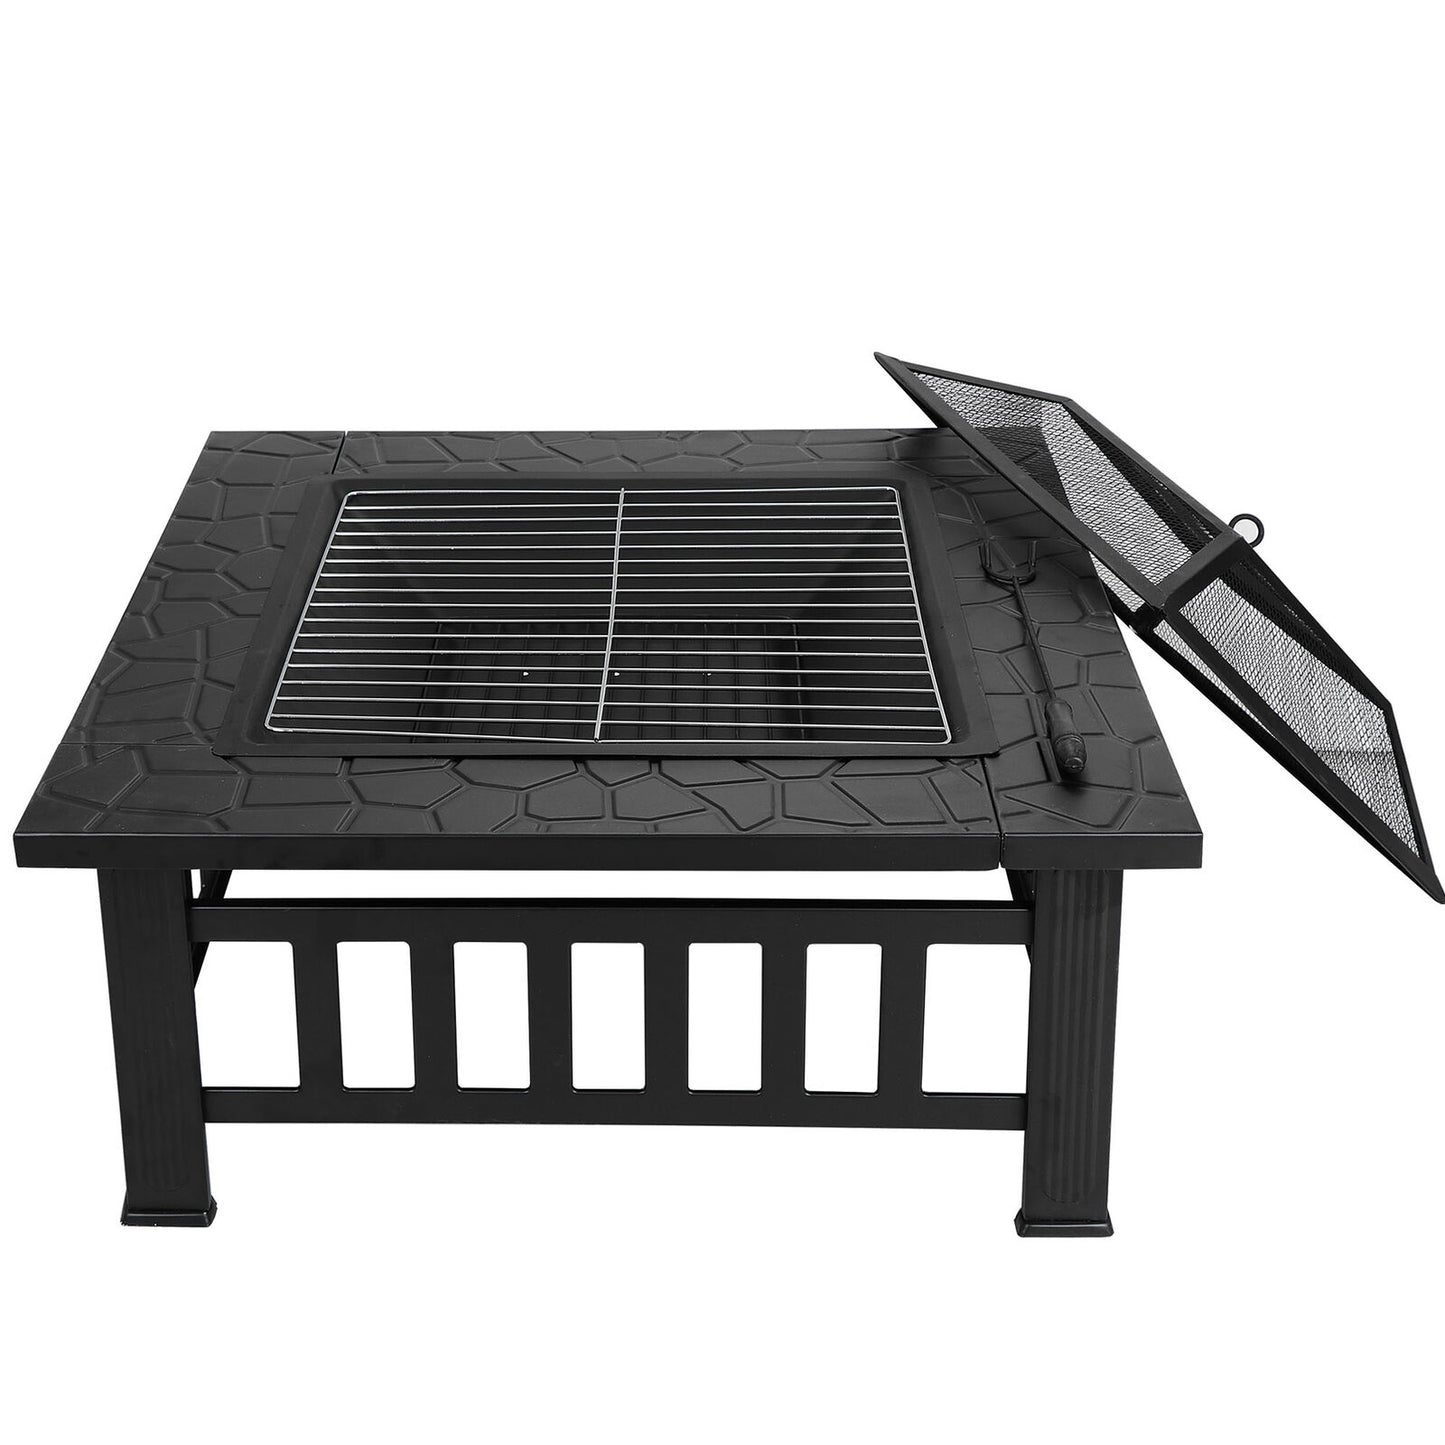 32" Square Metal Fire Pit Outdoor Patio Garden Backyard Stove Firepit Brazier